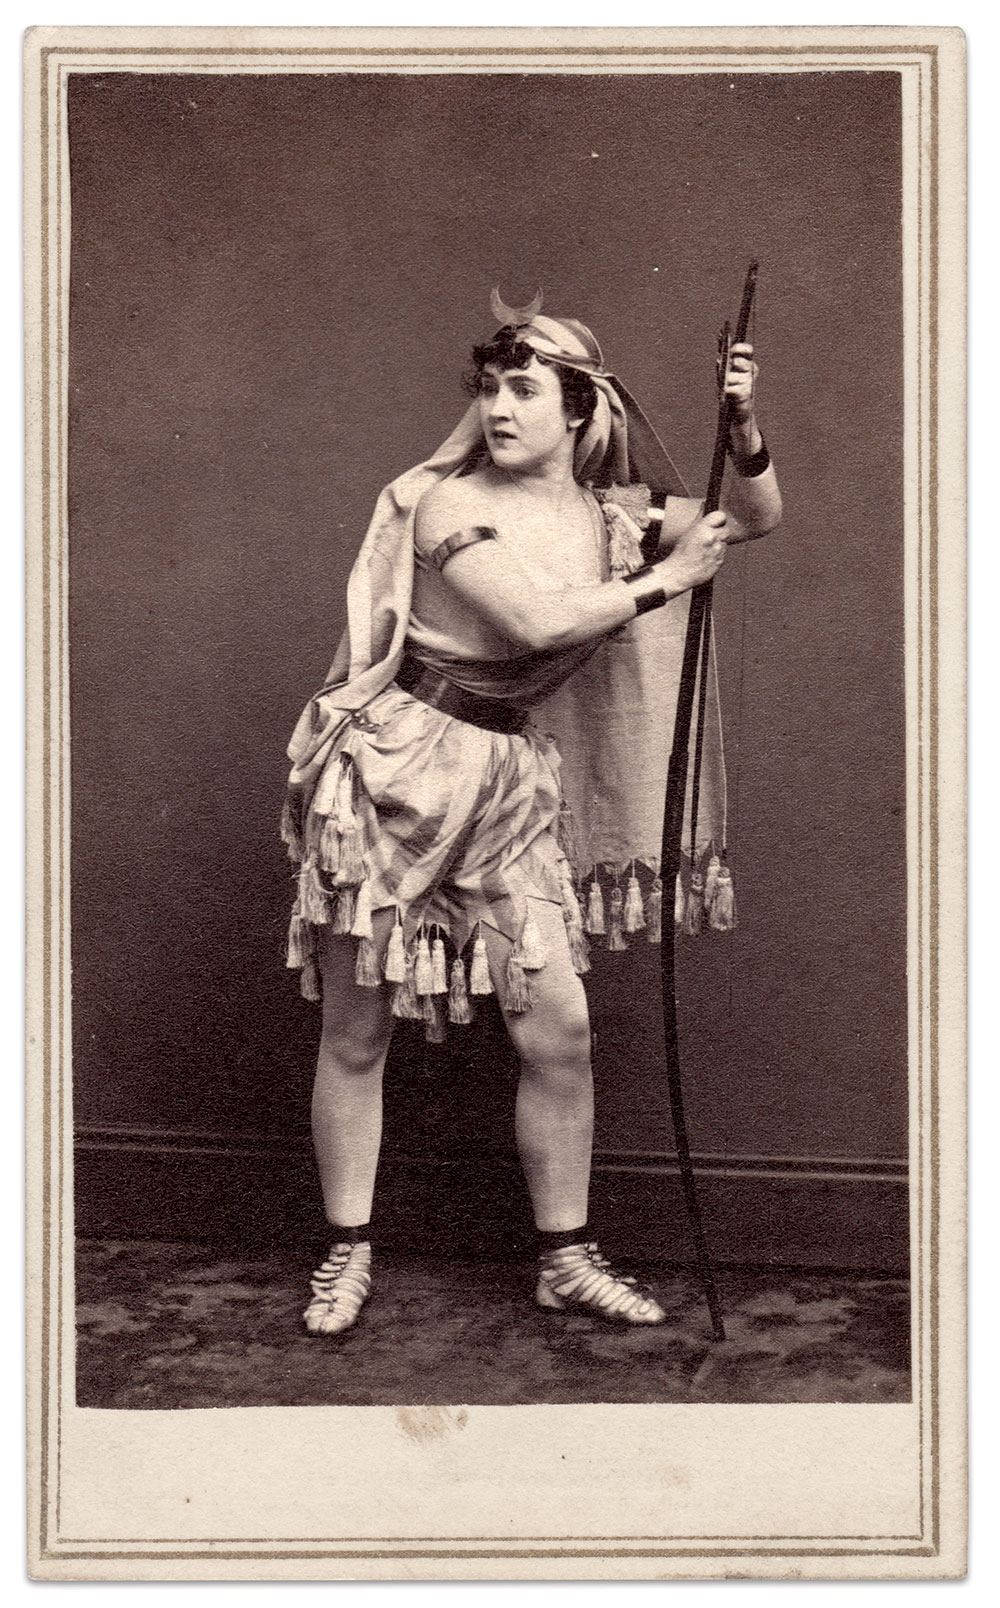 Menken acted in a variety of stage roles. Carte de visite by George H. Johnson of San Francisco, Calif.